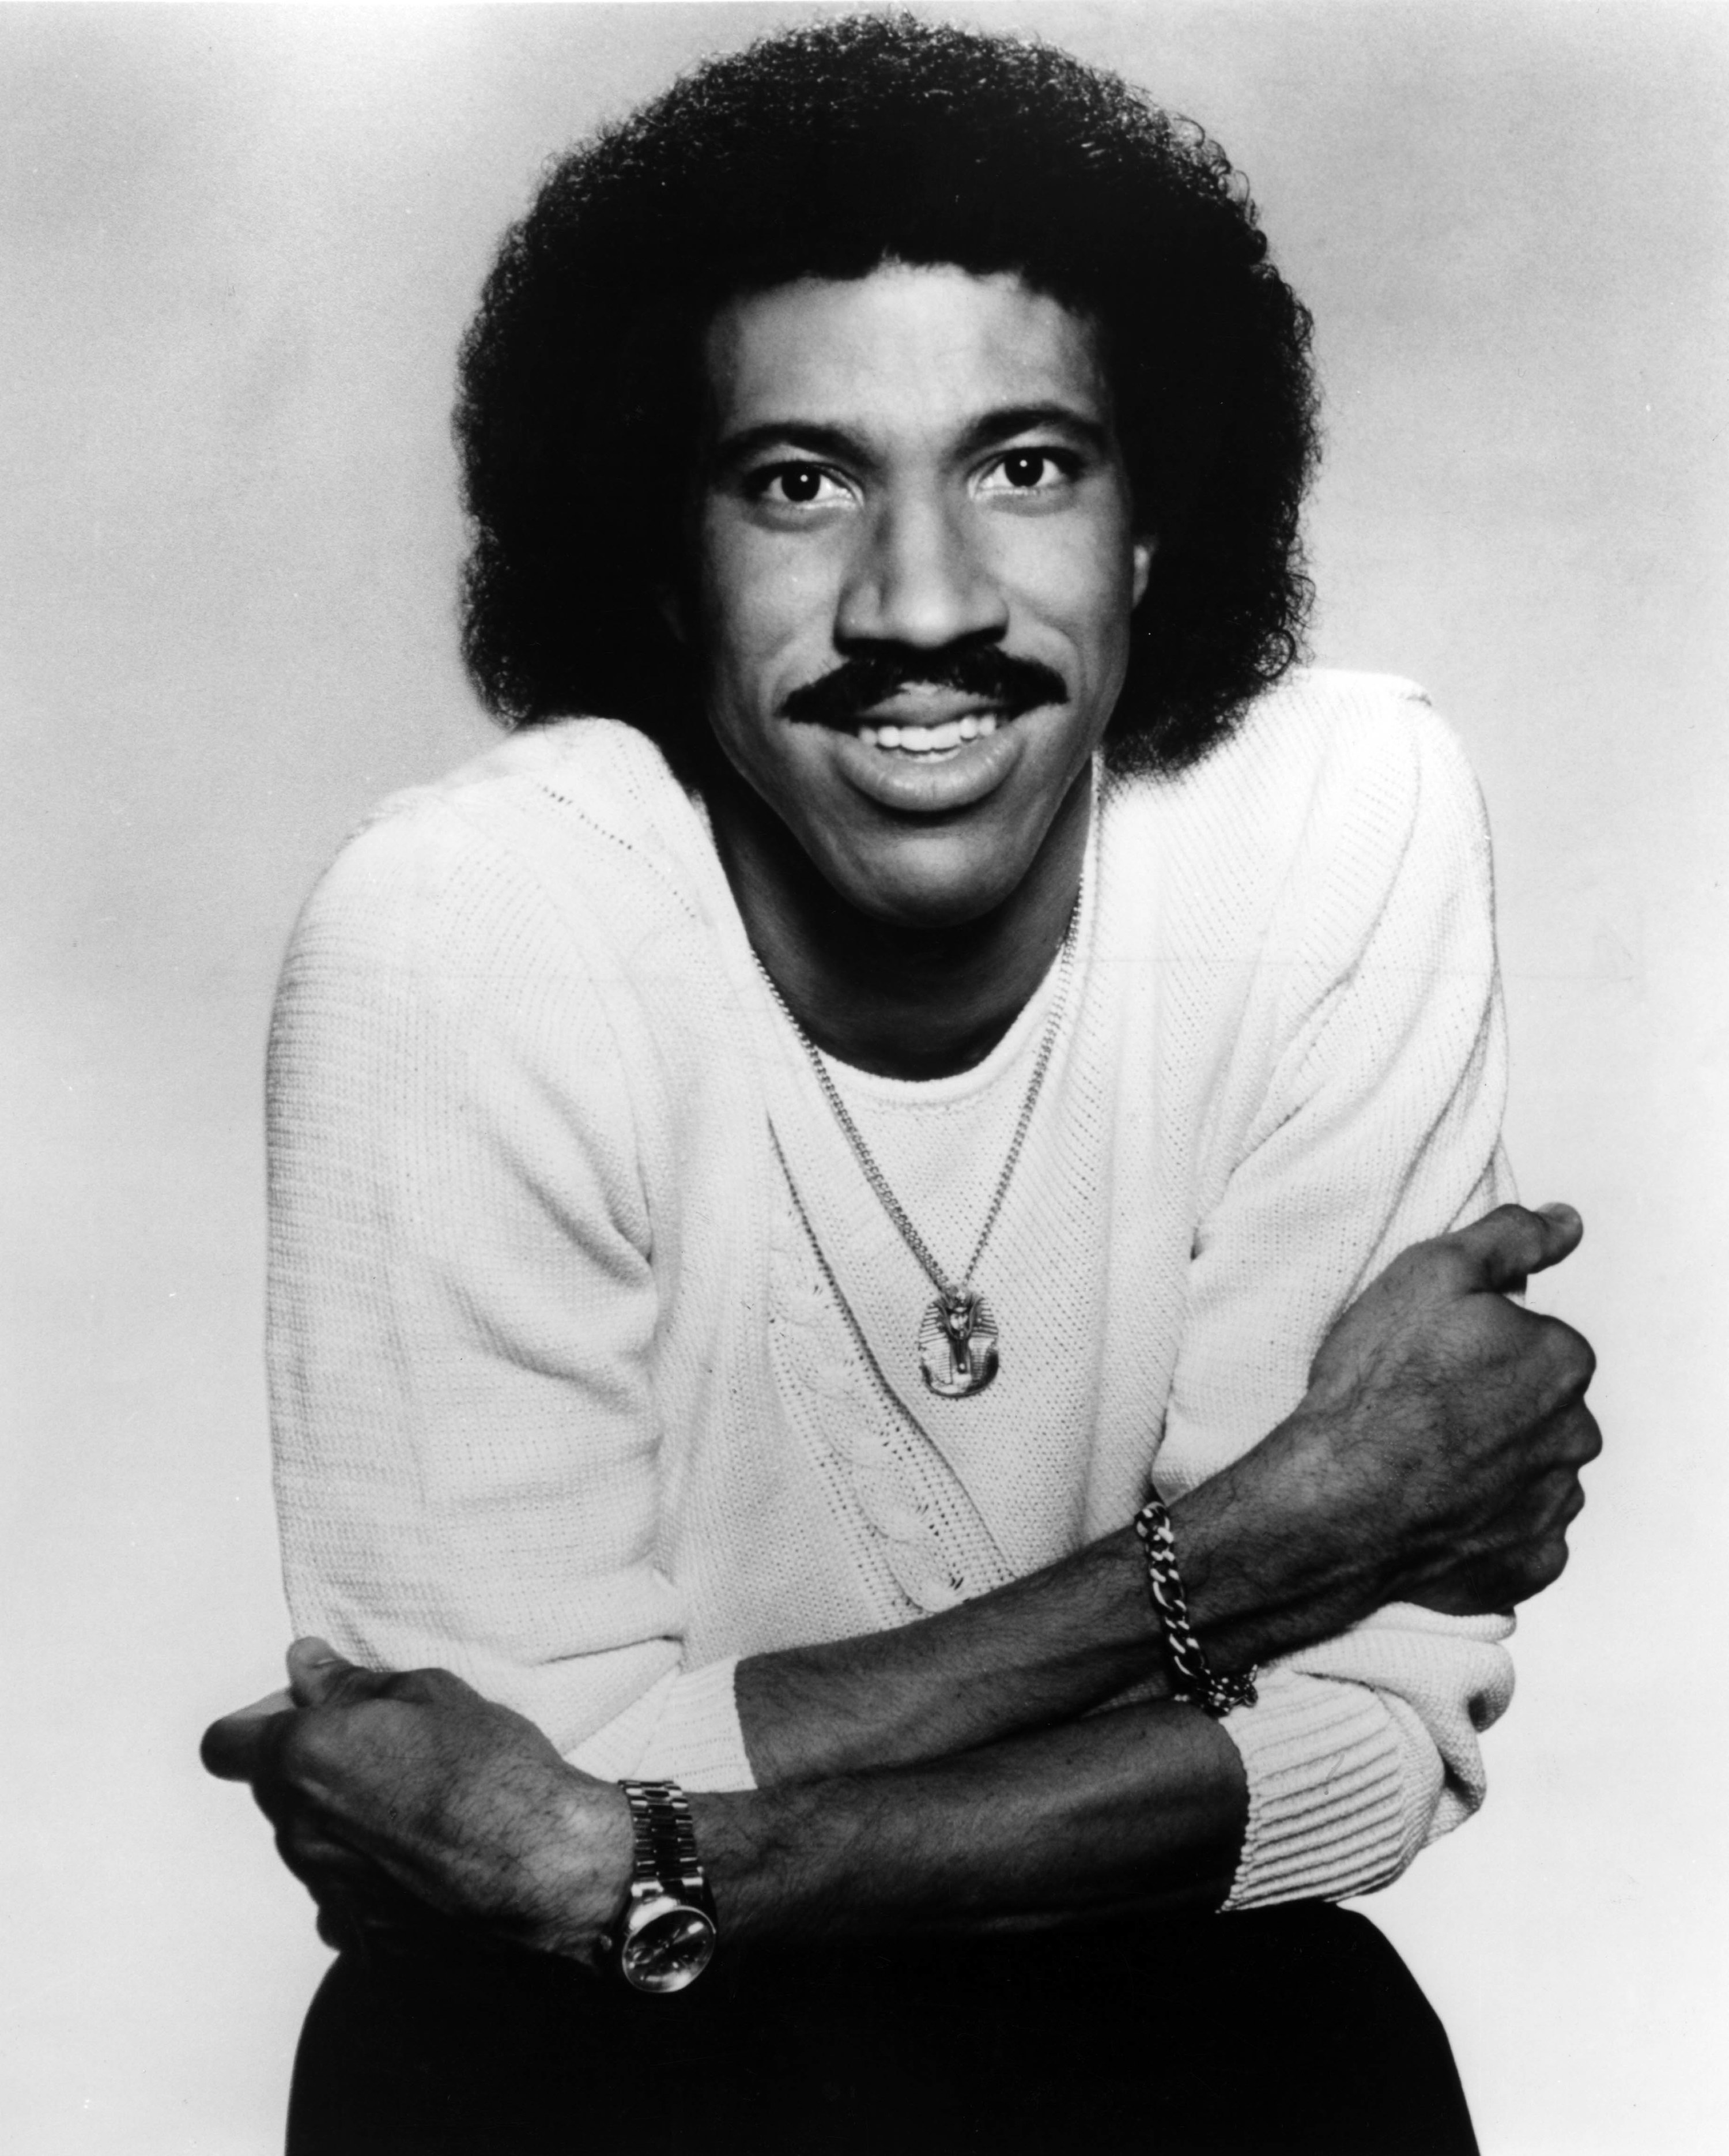 Young Lionel Richie